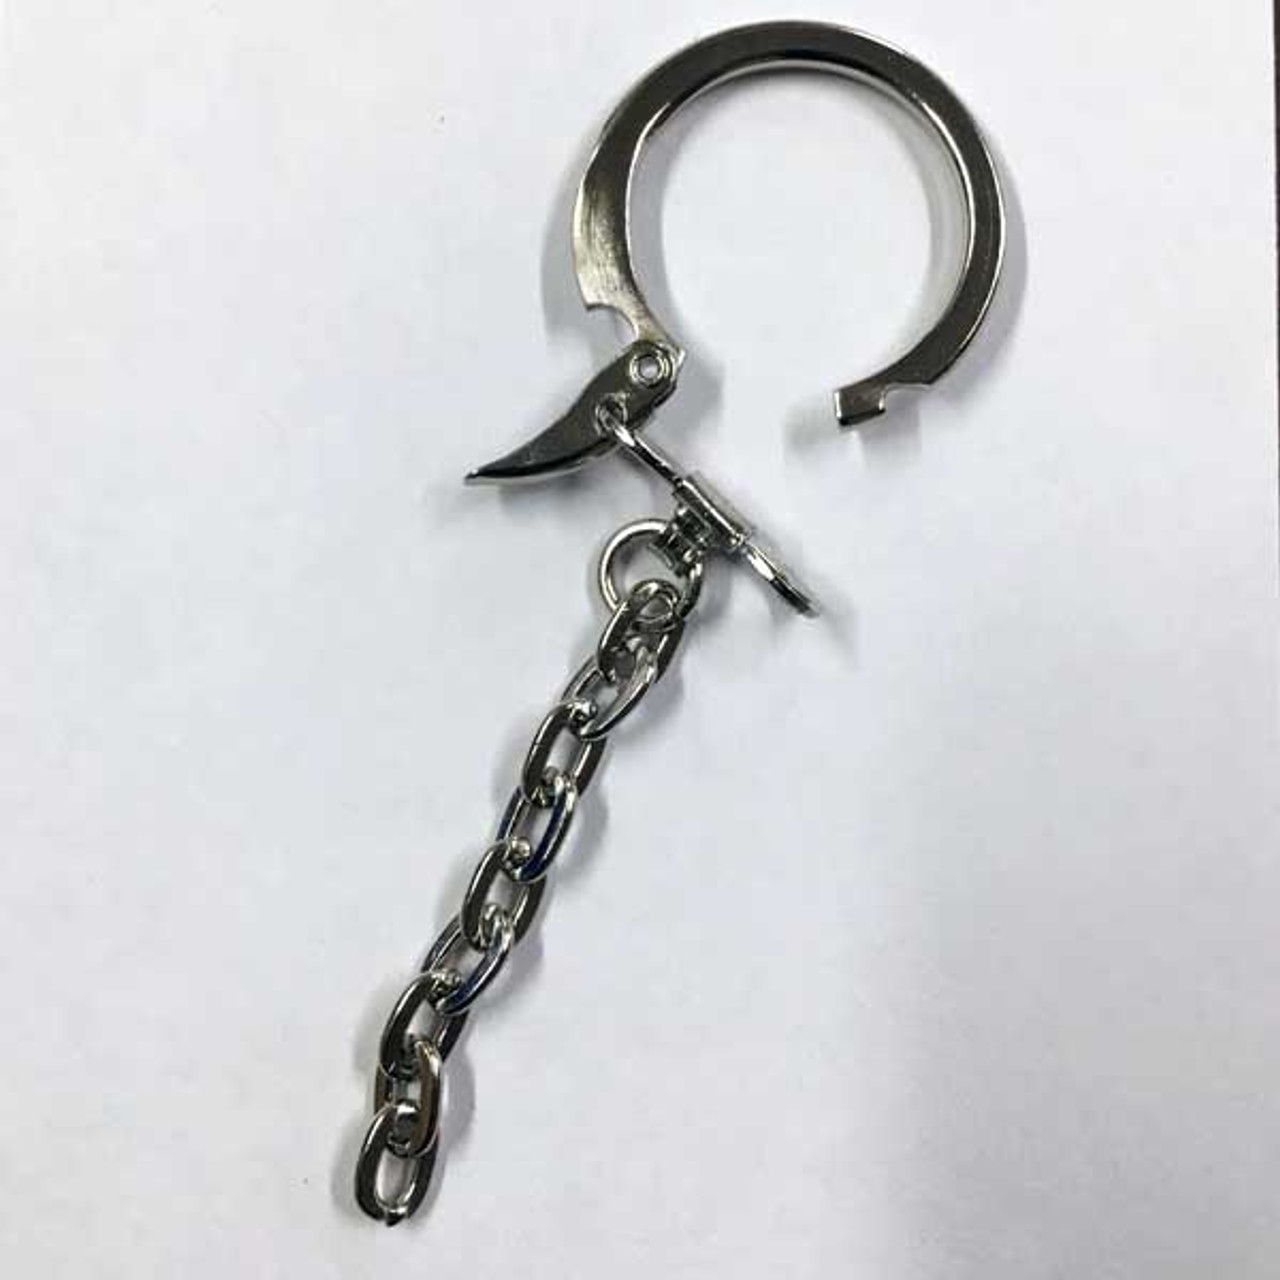 Shop for and Buy Easy Open Key Ring Assembly 72 to a Pack at .  Large selection and bulk discounts available.